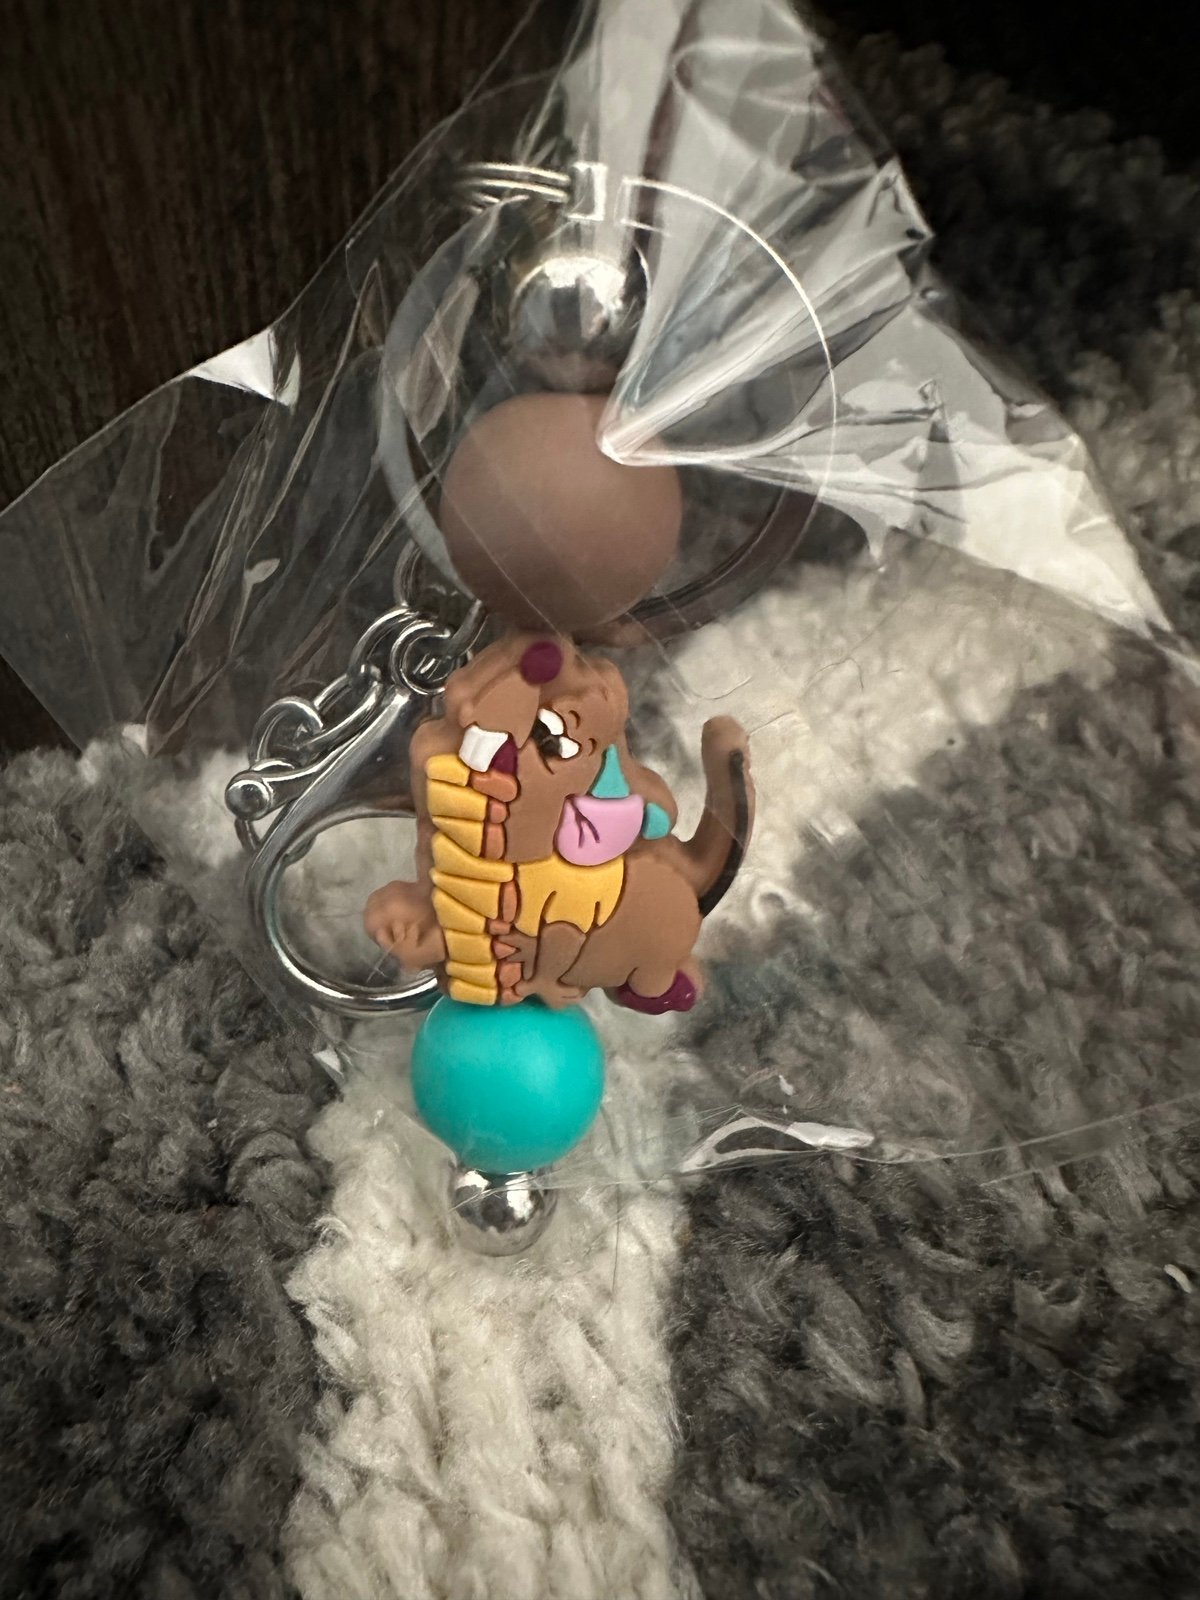 New Gus Gus Silicon Bead Keychain atf52fIRT